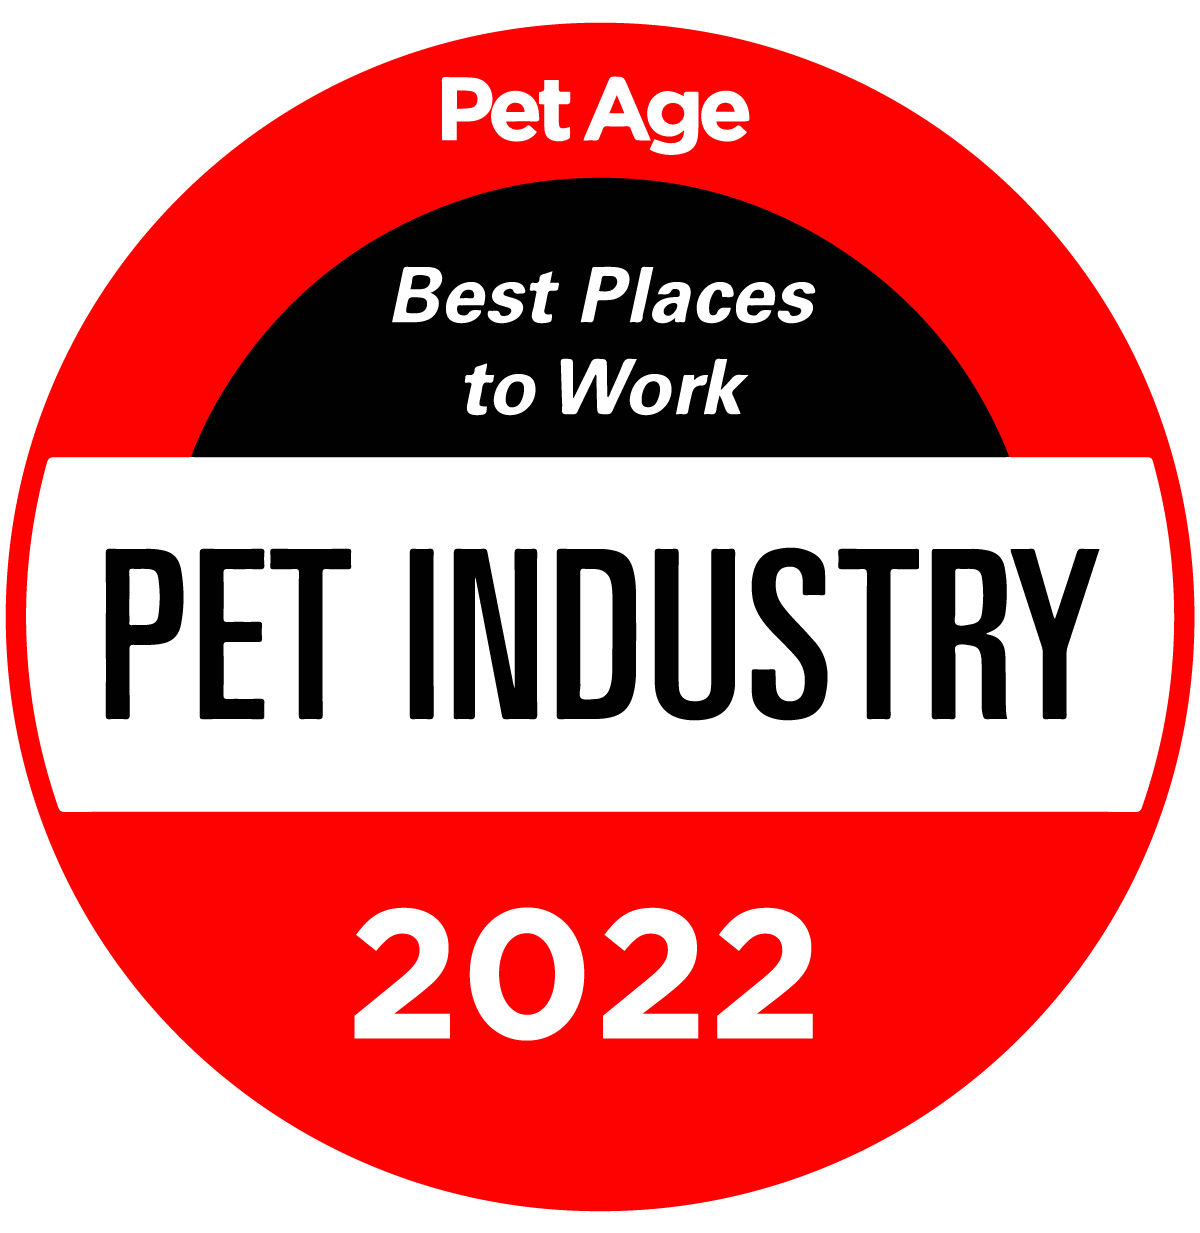 Best Places to Work Pet Industry